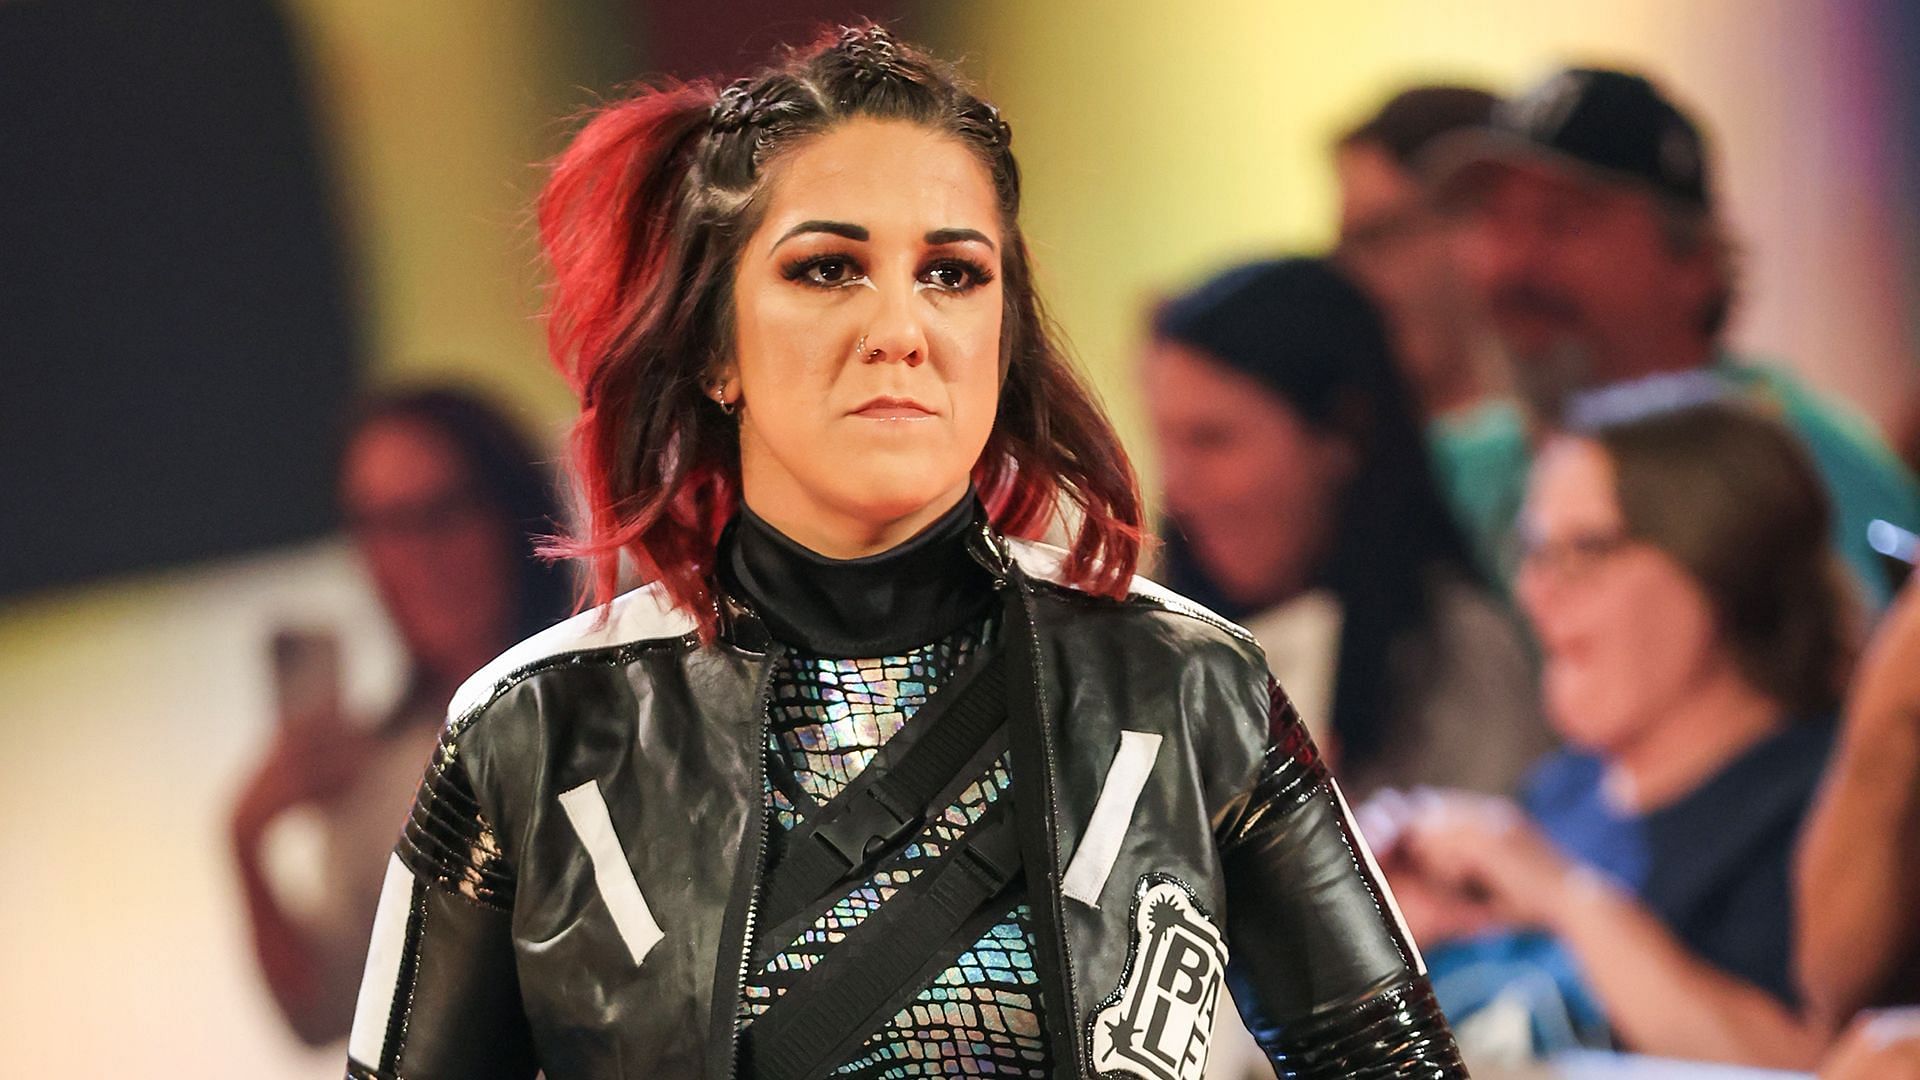 Bayley heads to the ring on WWE SmackDown